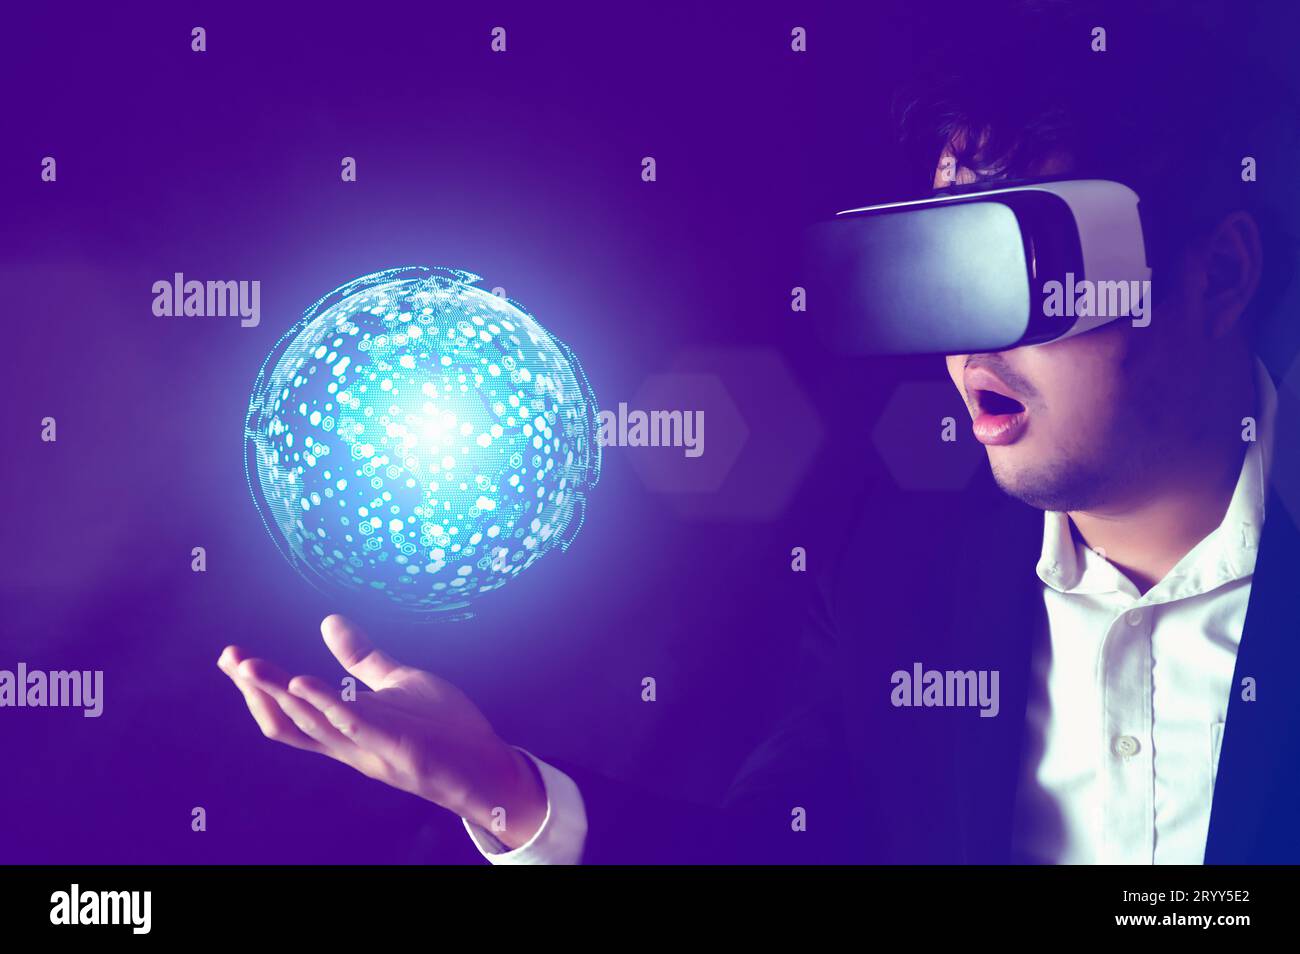 Businessman wearing Virtual reality headset with globe hologram on his hand. Business technology and Metaverse concept Stock Photo